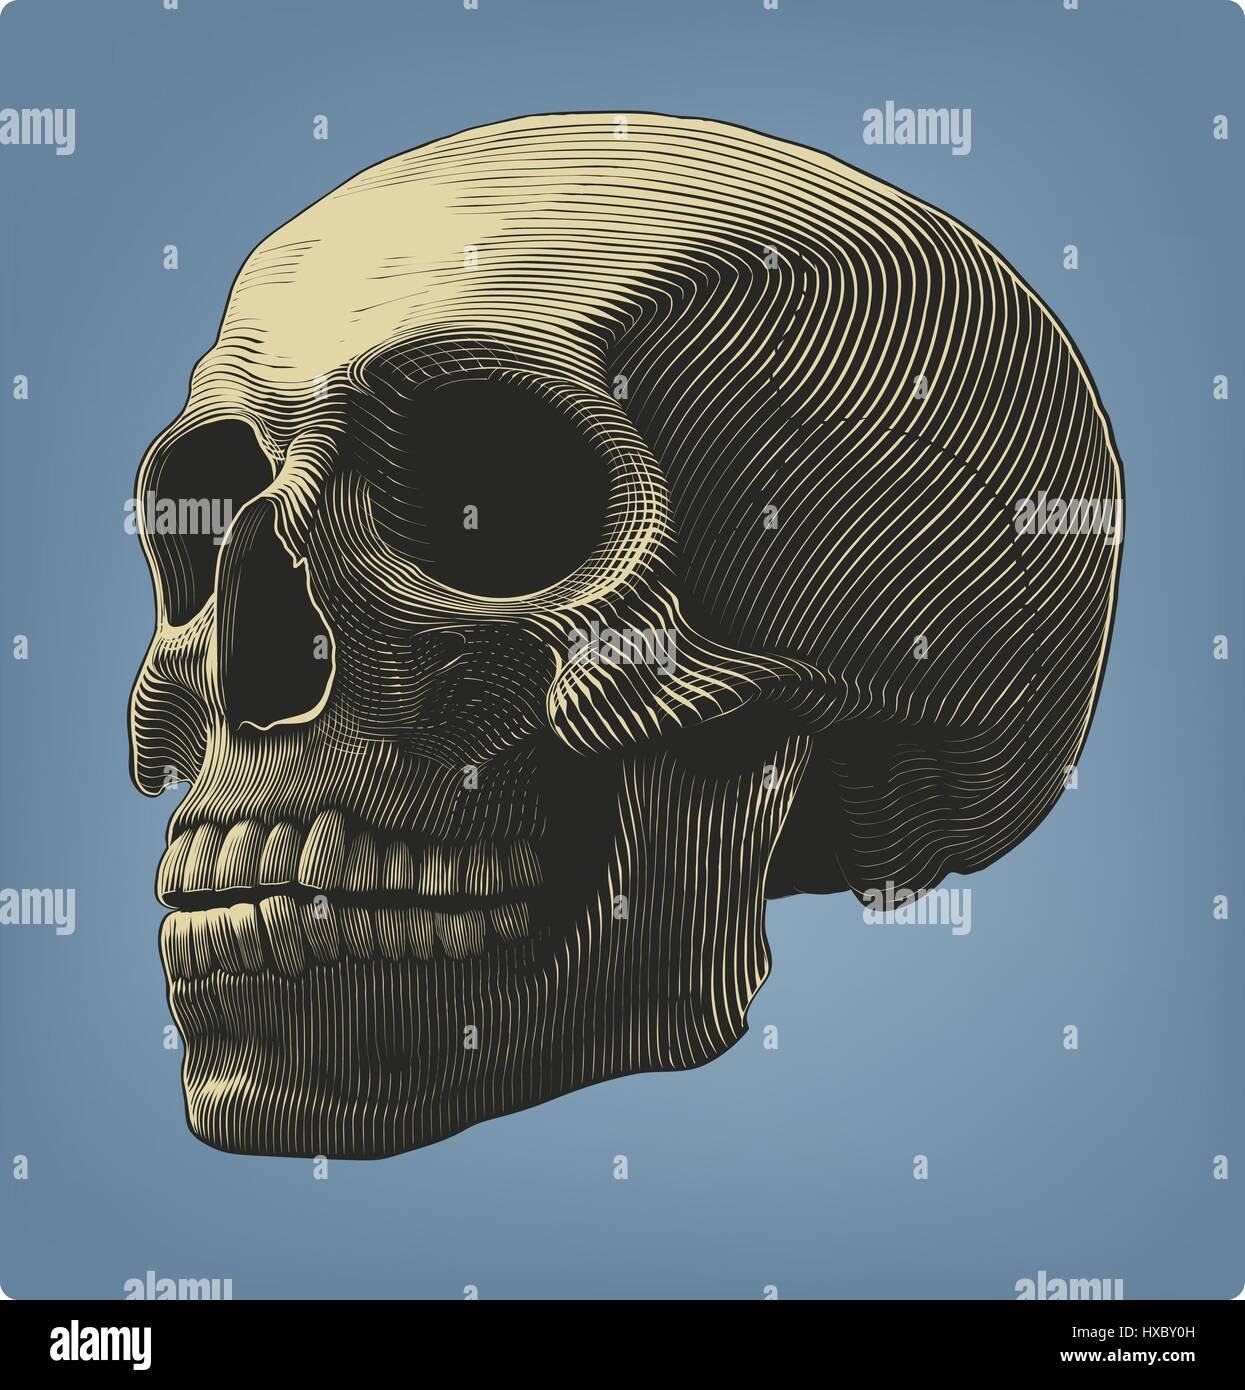 Vector illustration of human skull in woodcut style on isolated background Stock Vector